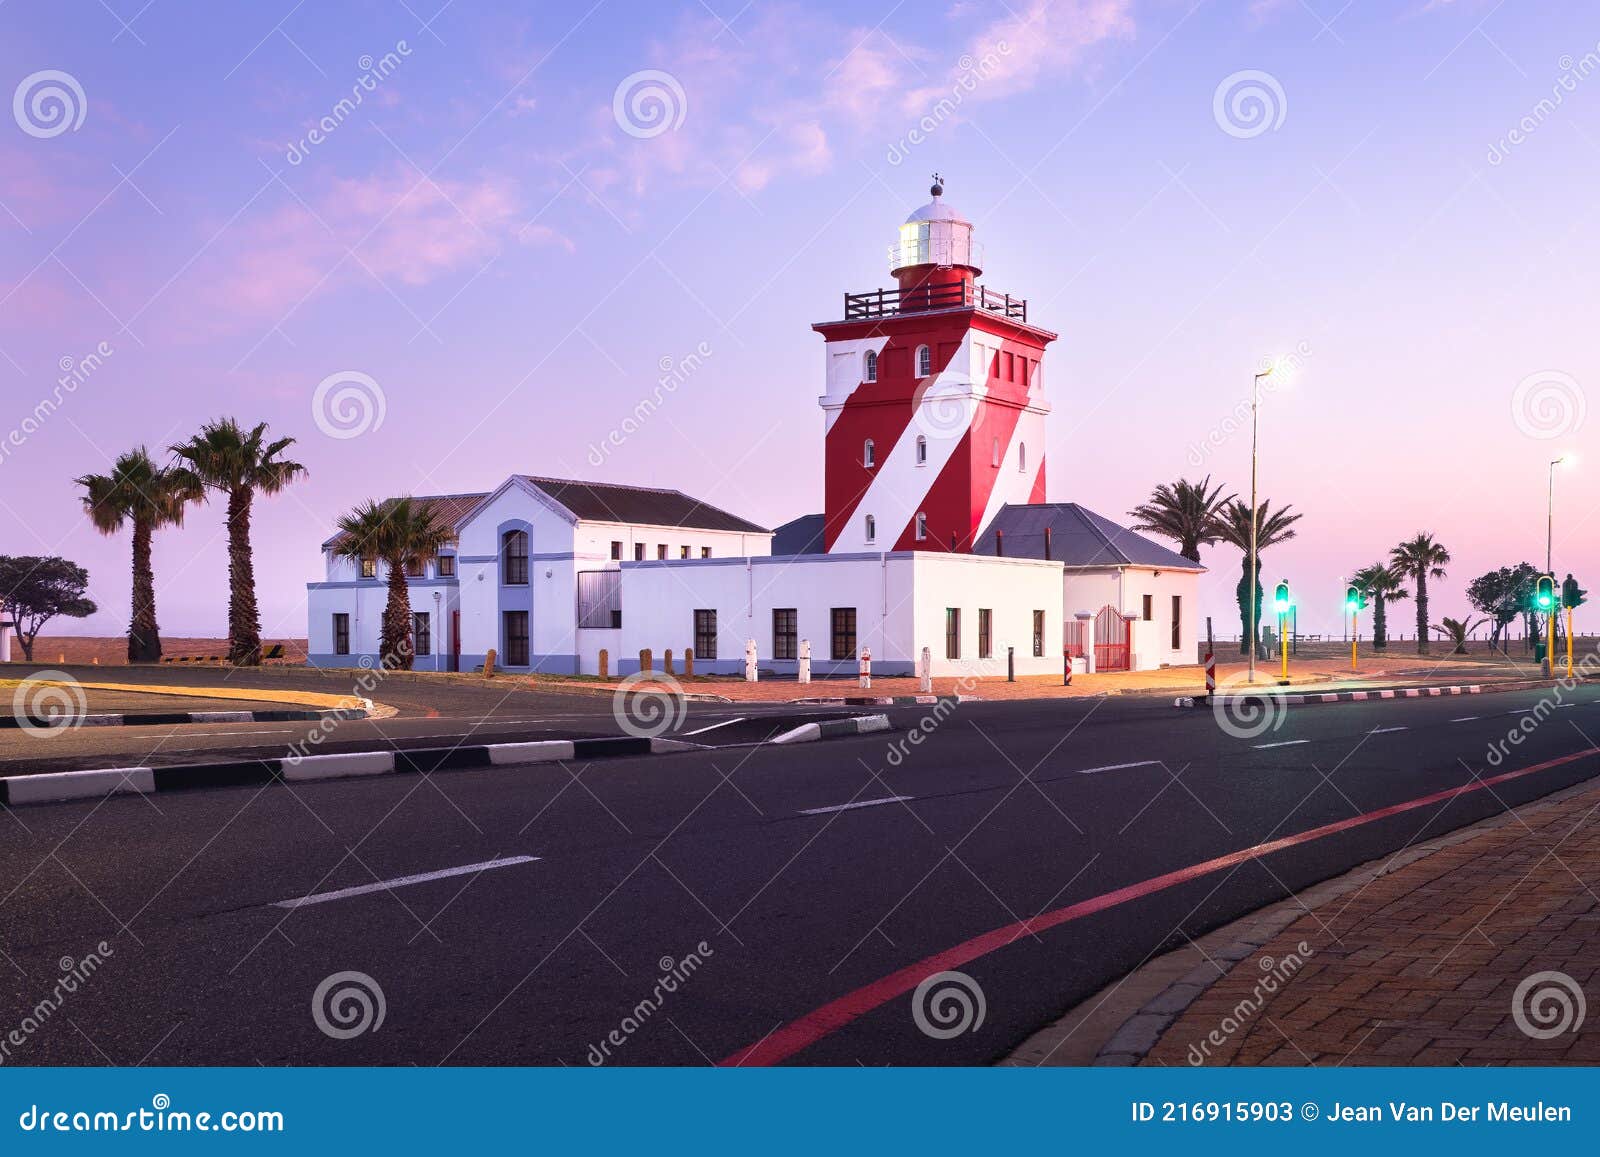 green point lighthouse